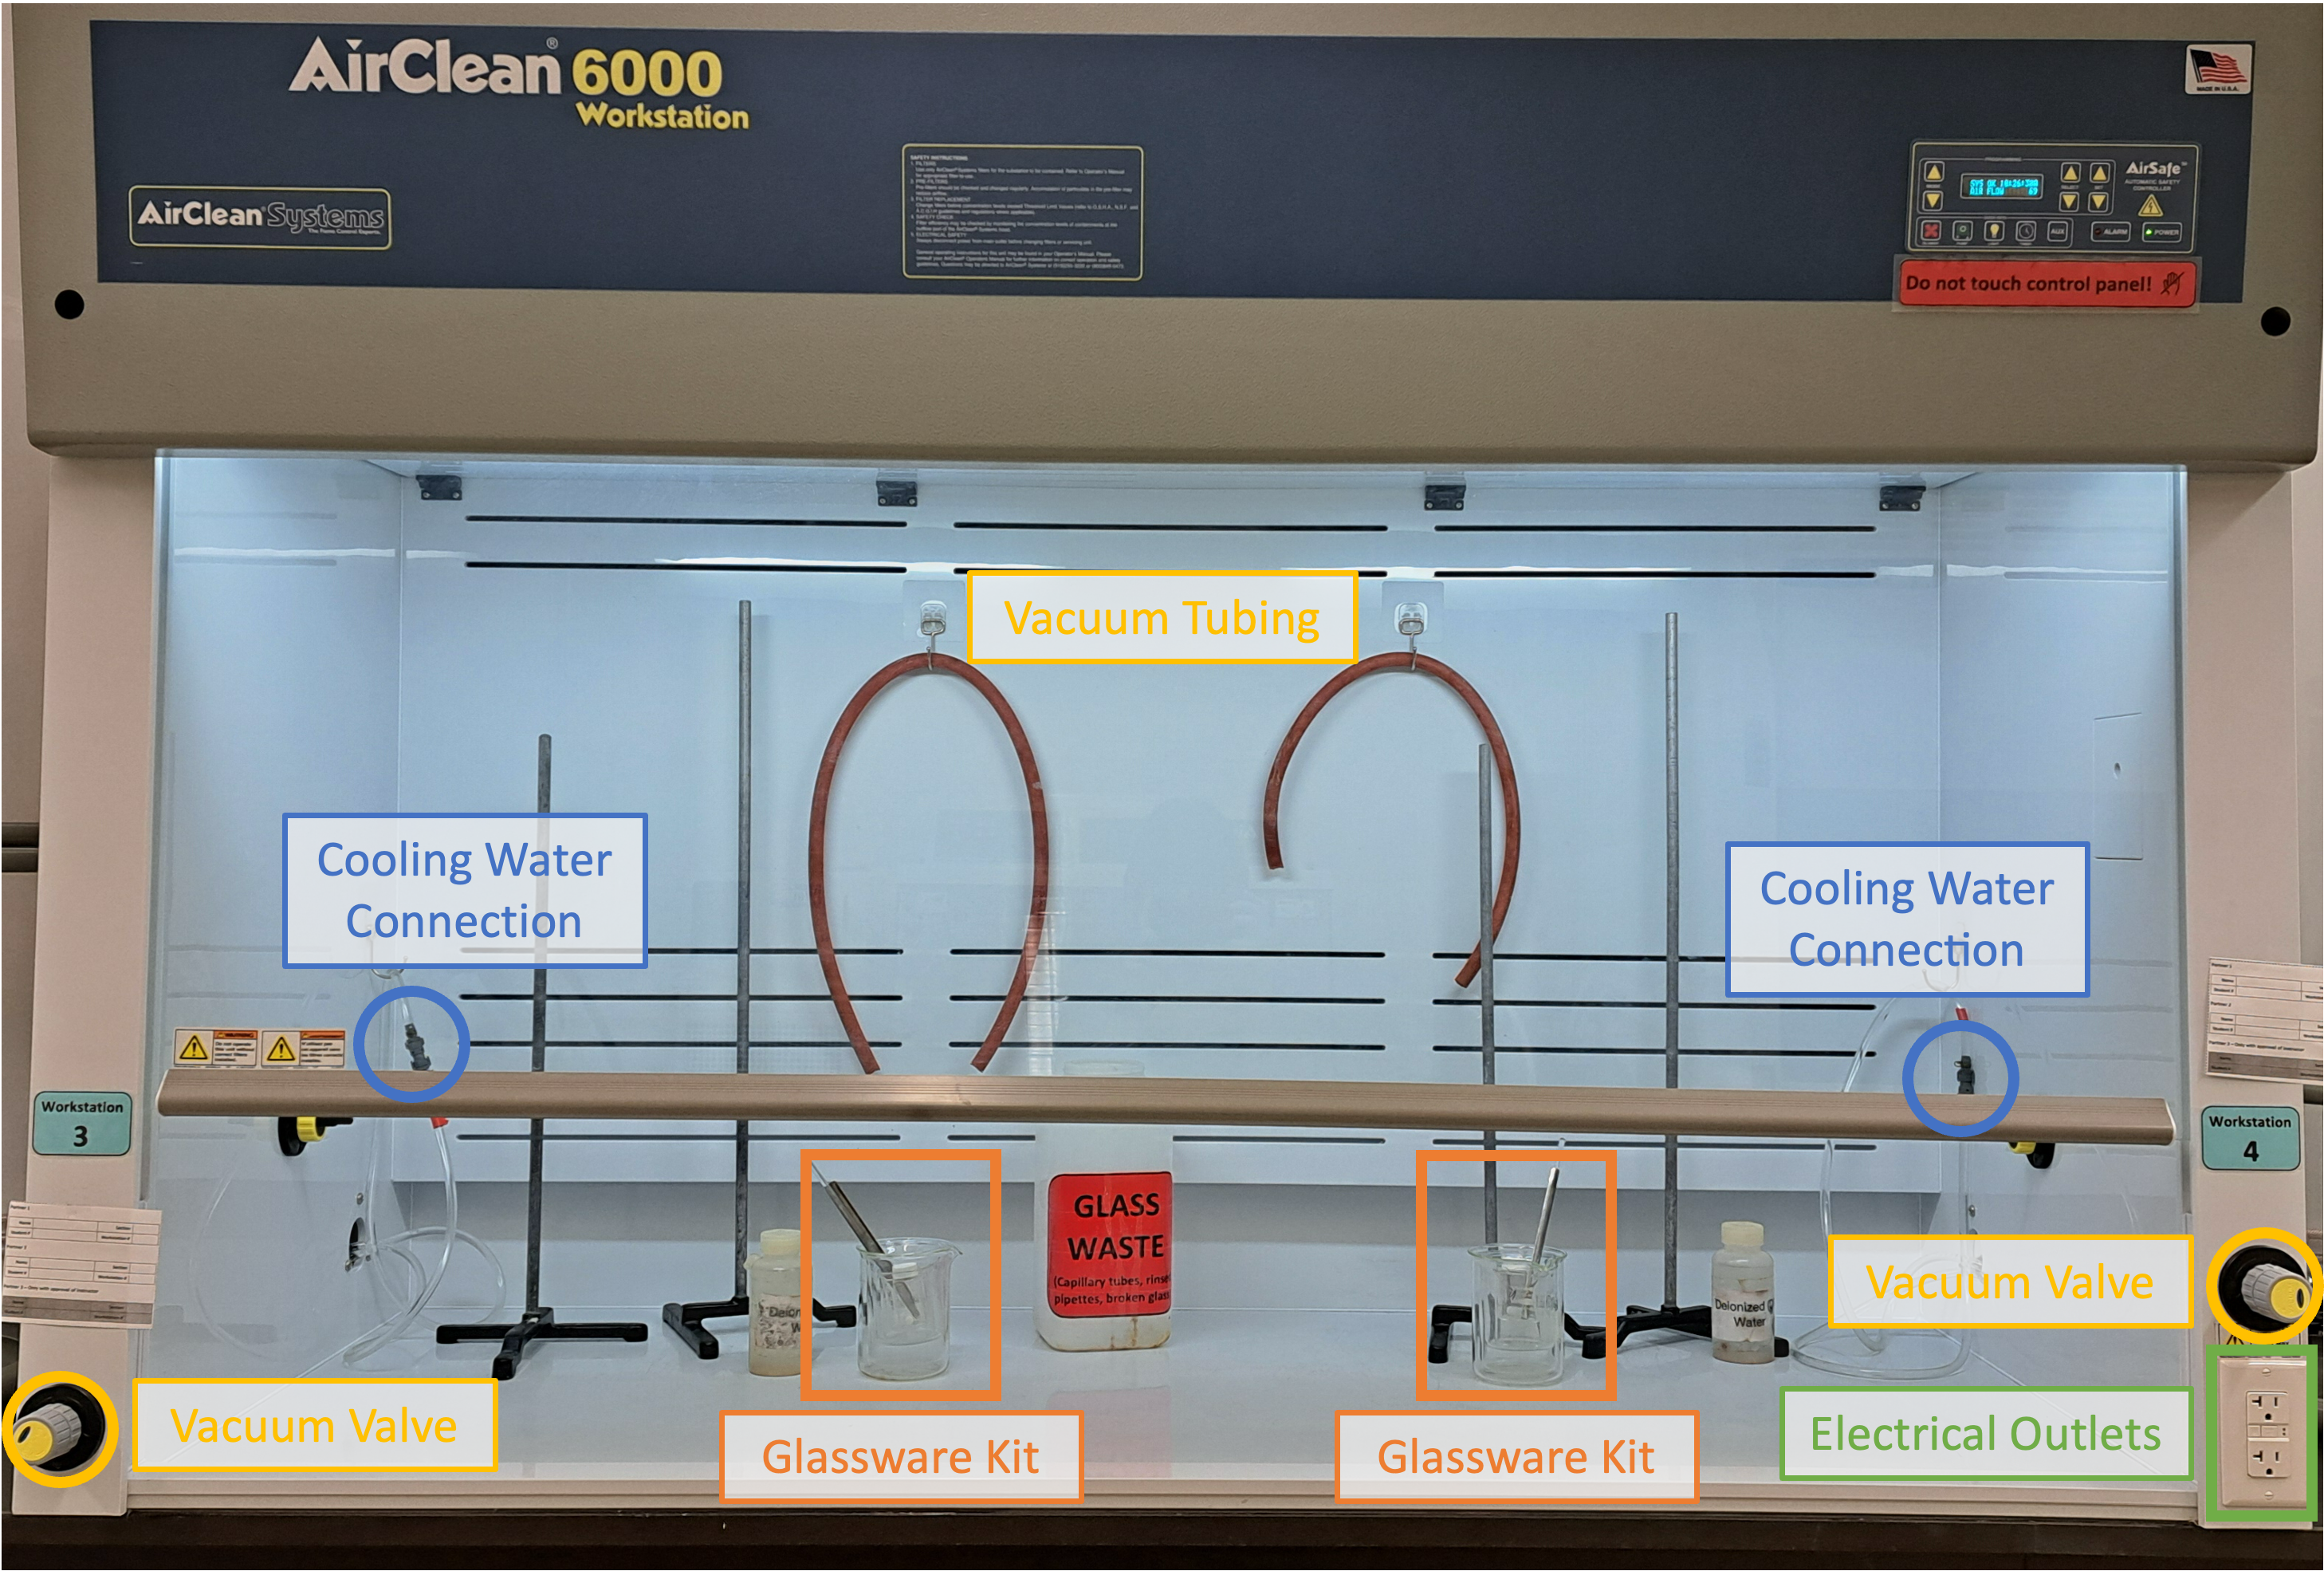 Fume hood in chemistry laboratory. Inside the fume hood there are four retort stands, two vacuum lines and two beaker stacks. Two groups can work in the fume hood.